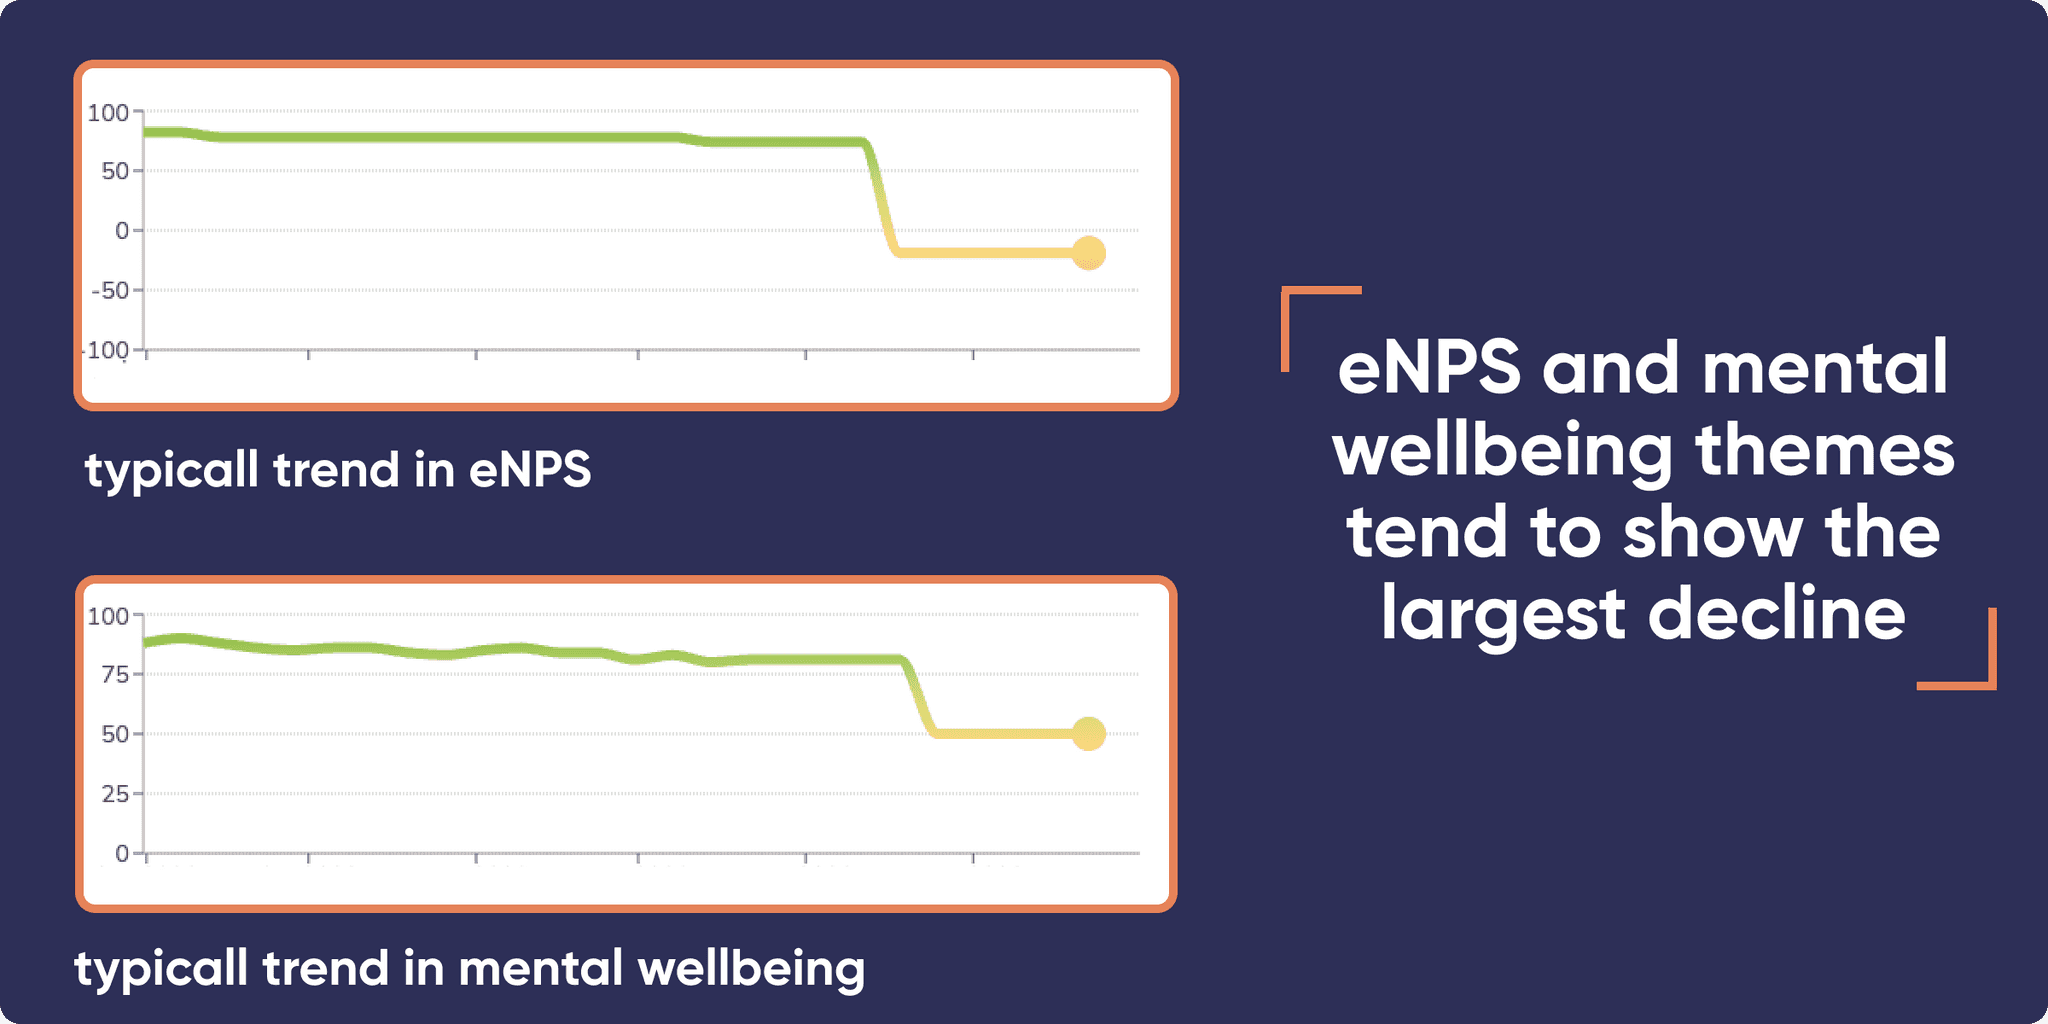 Mental wellbeing and eNPS are largely impacted by layoffs.